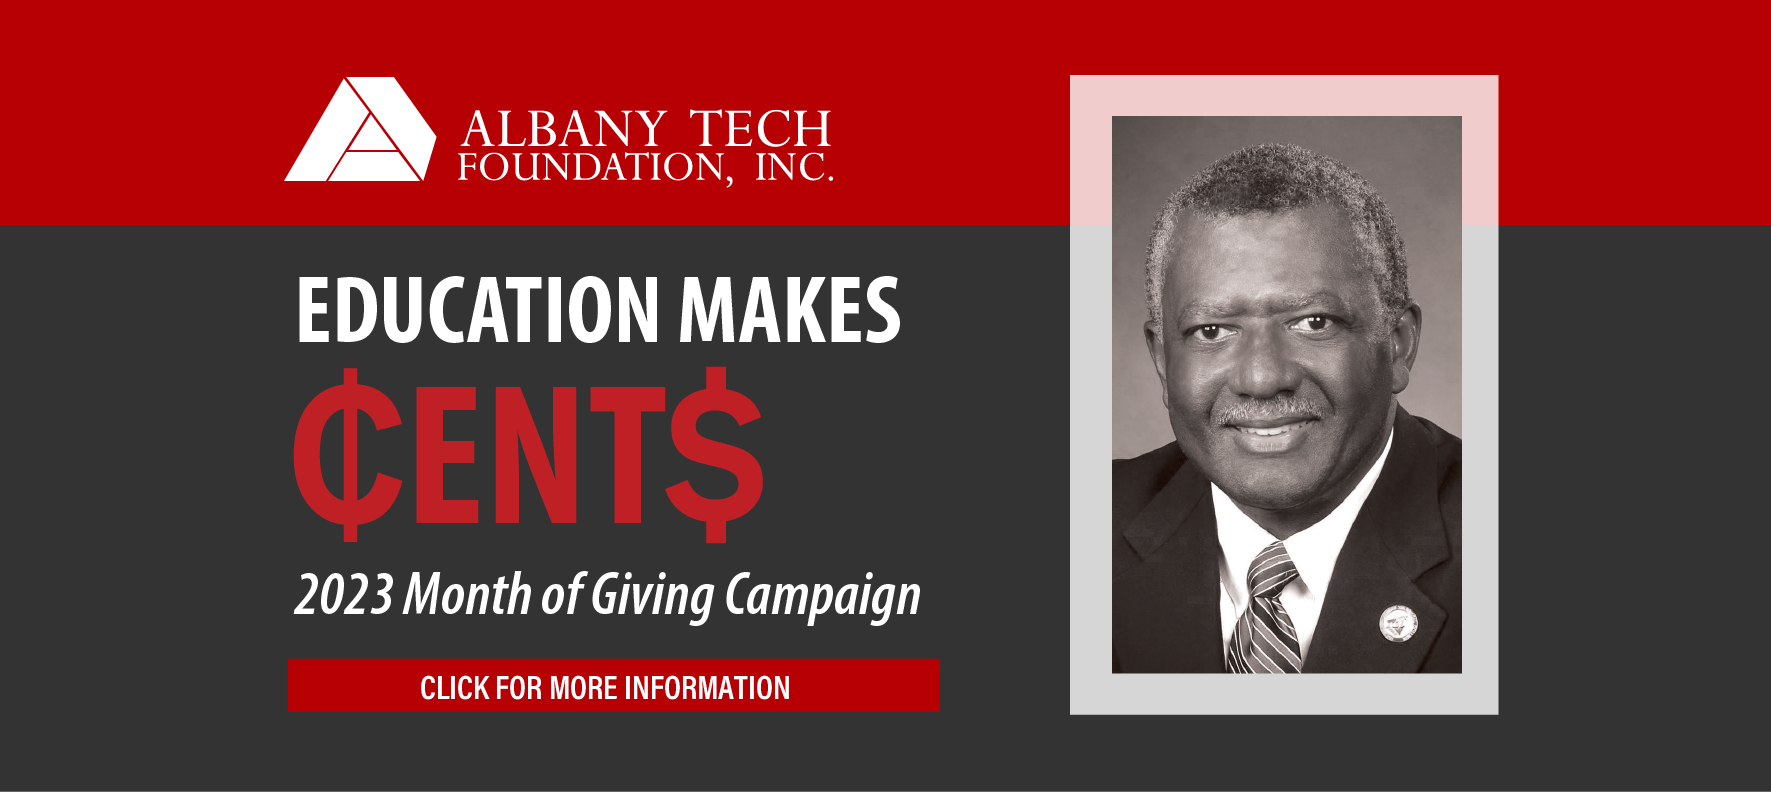 Albany Tech Foundation Inc. Education Makes Cents graphic with photo of Dr. Parker.  